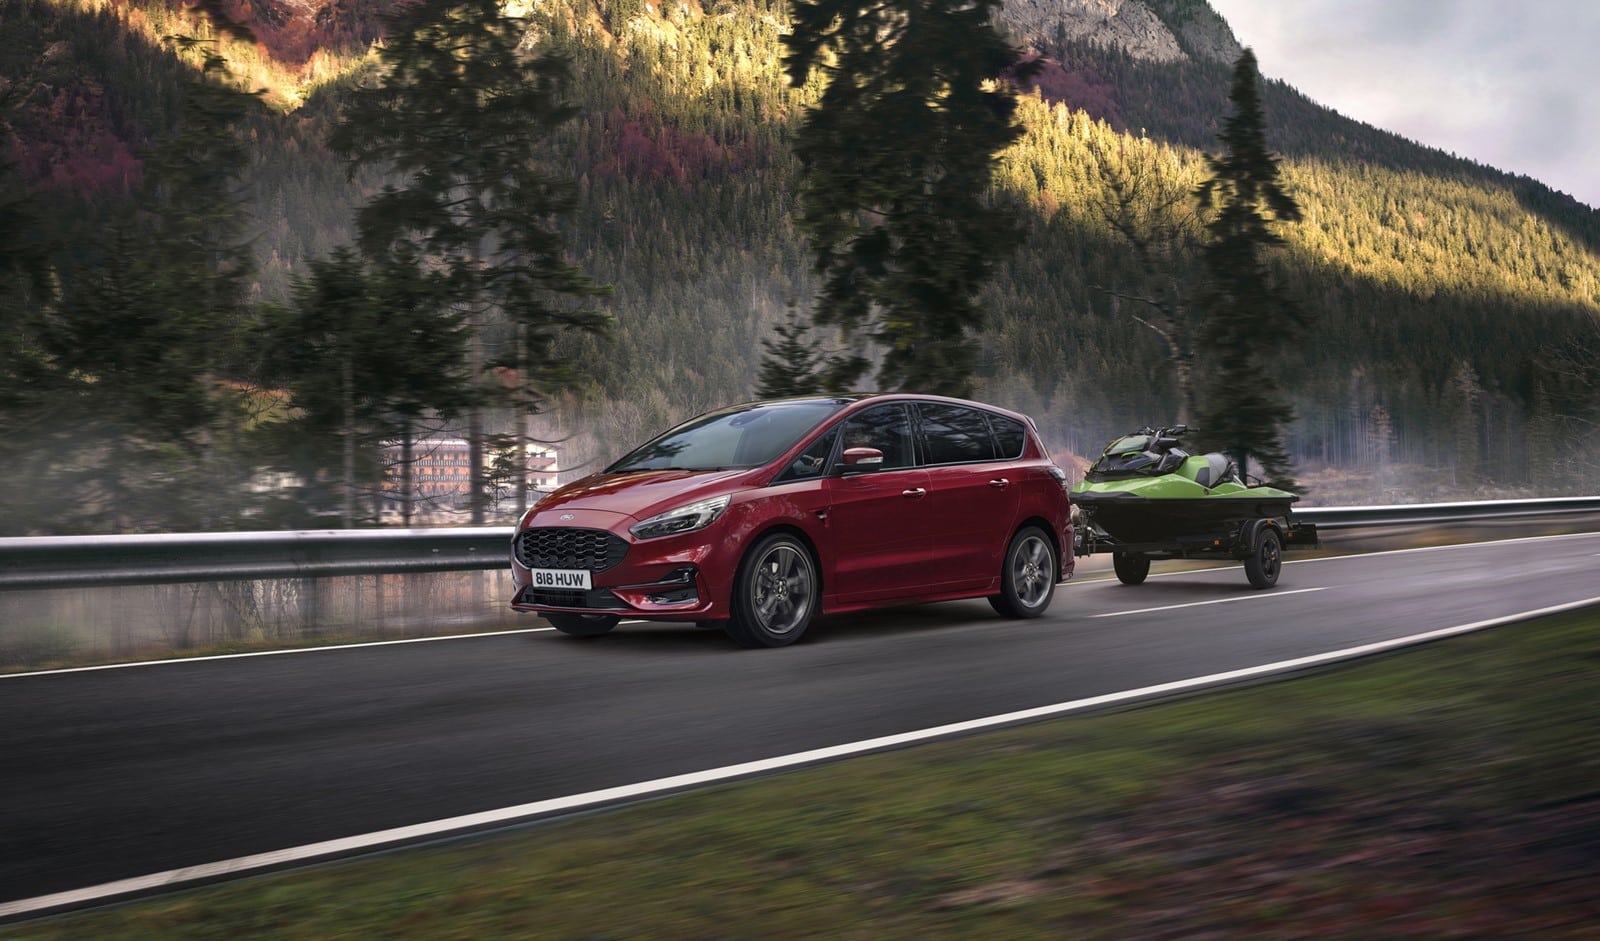 New images of the Ford S-Max and Galaxy hybrids: already available in Spain